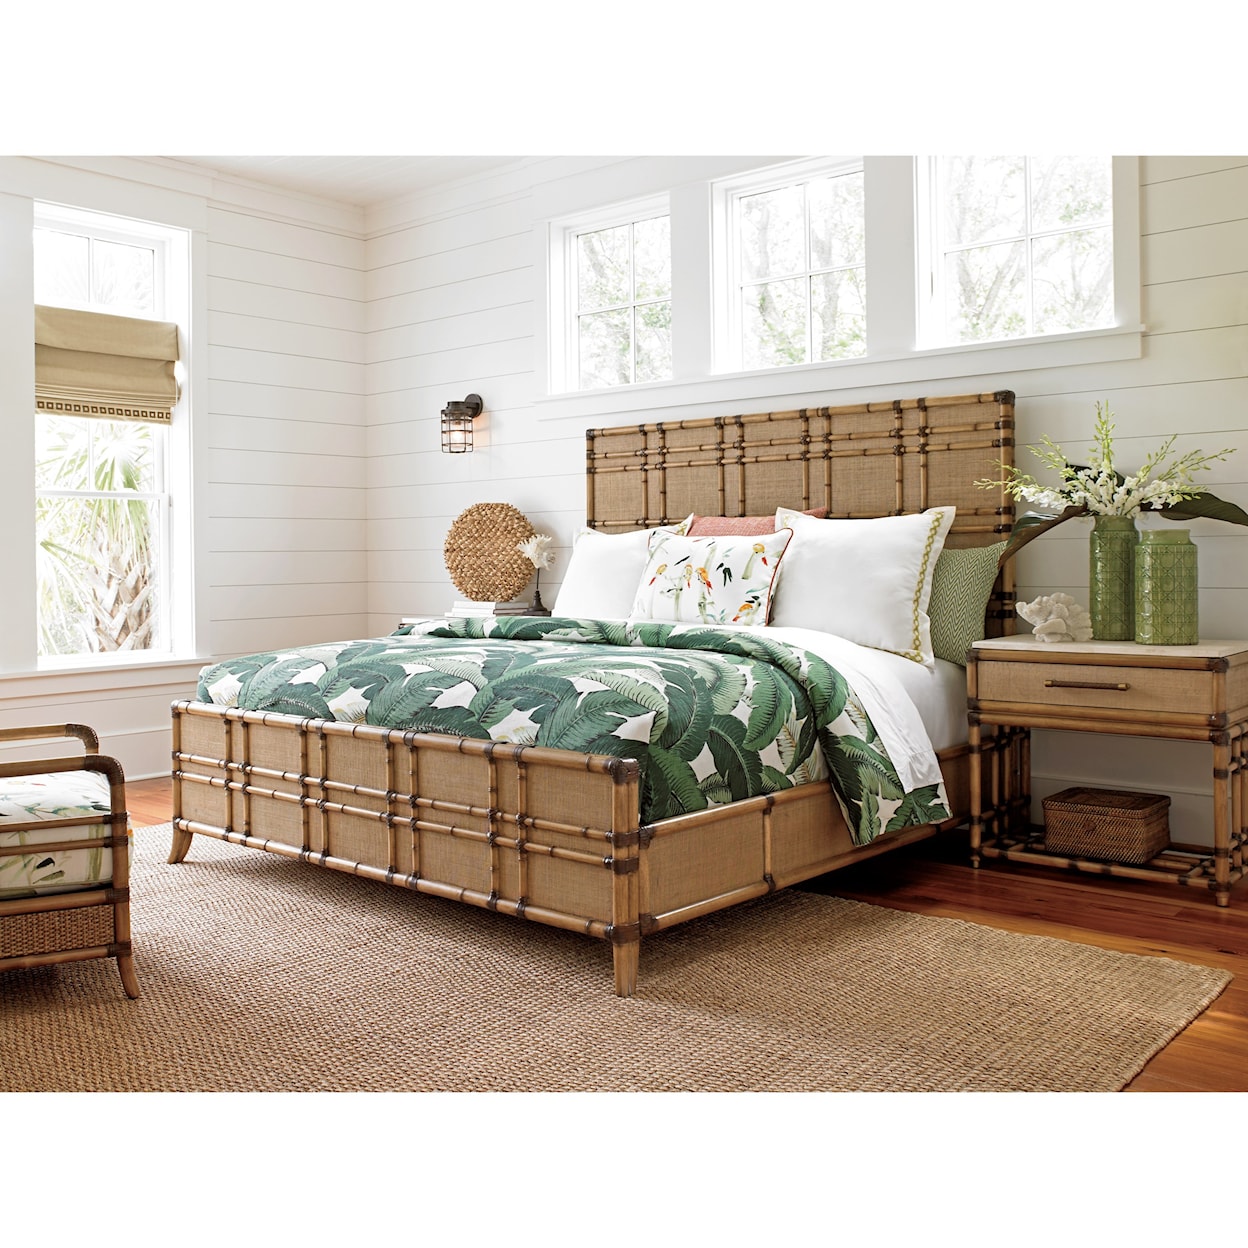 Tommy Bahama Home Twin Palms King Bedroom Group